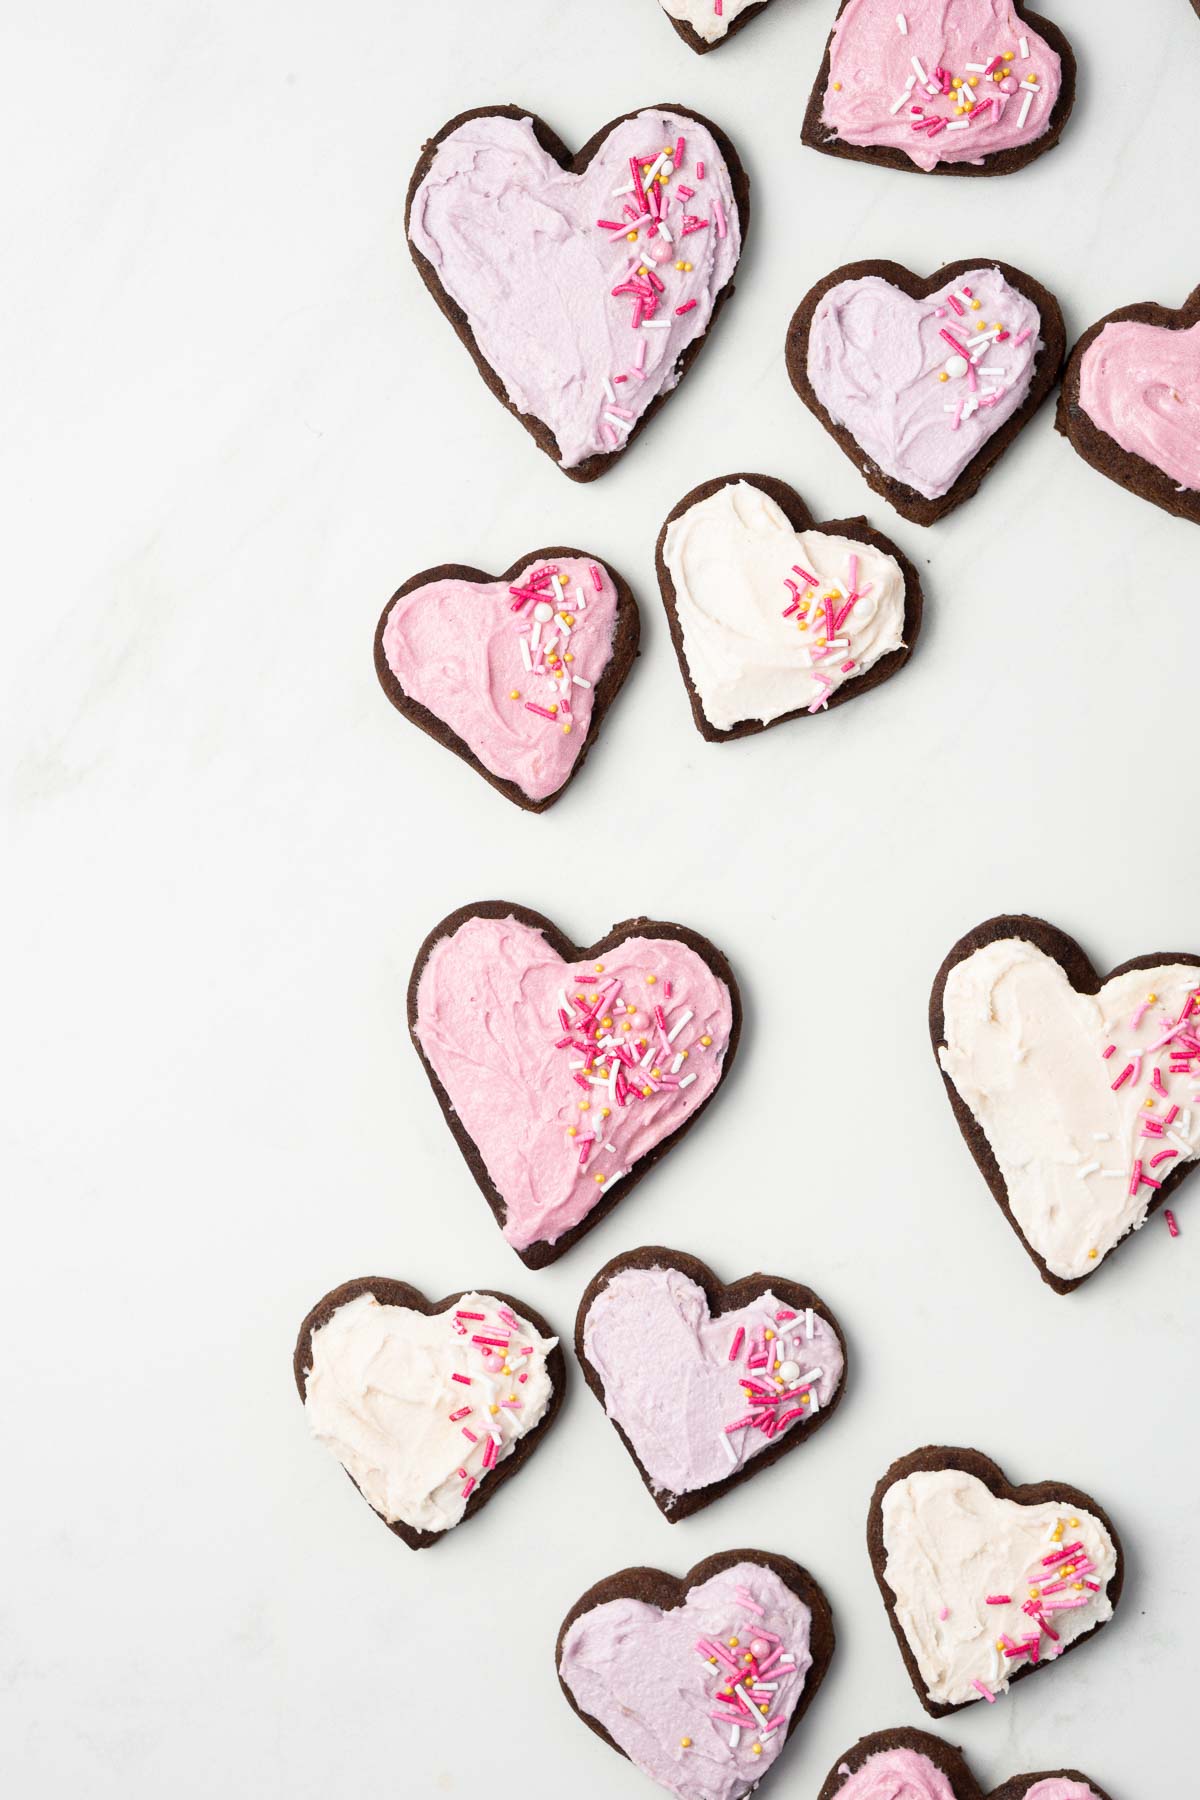 Pink and purple iced chocolate sugar cookies with sprinkles.